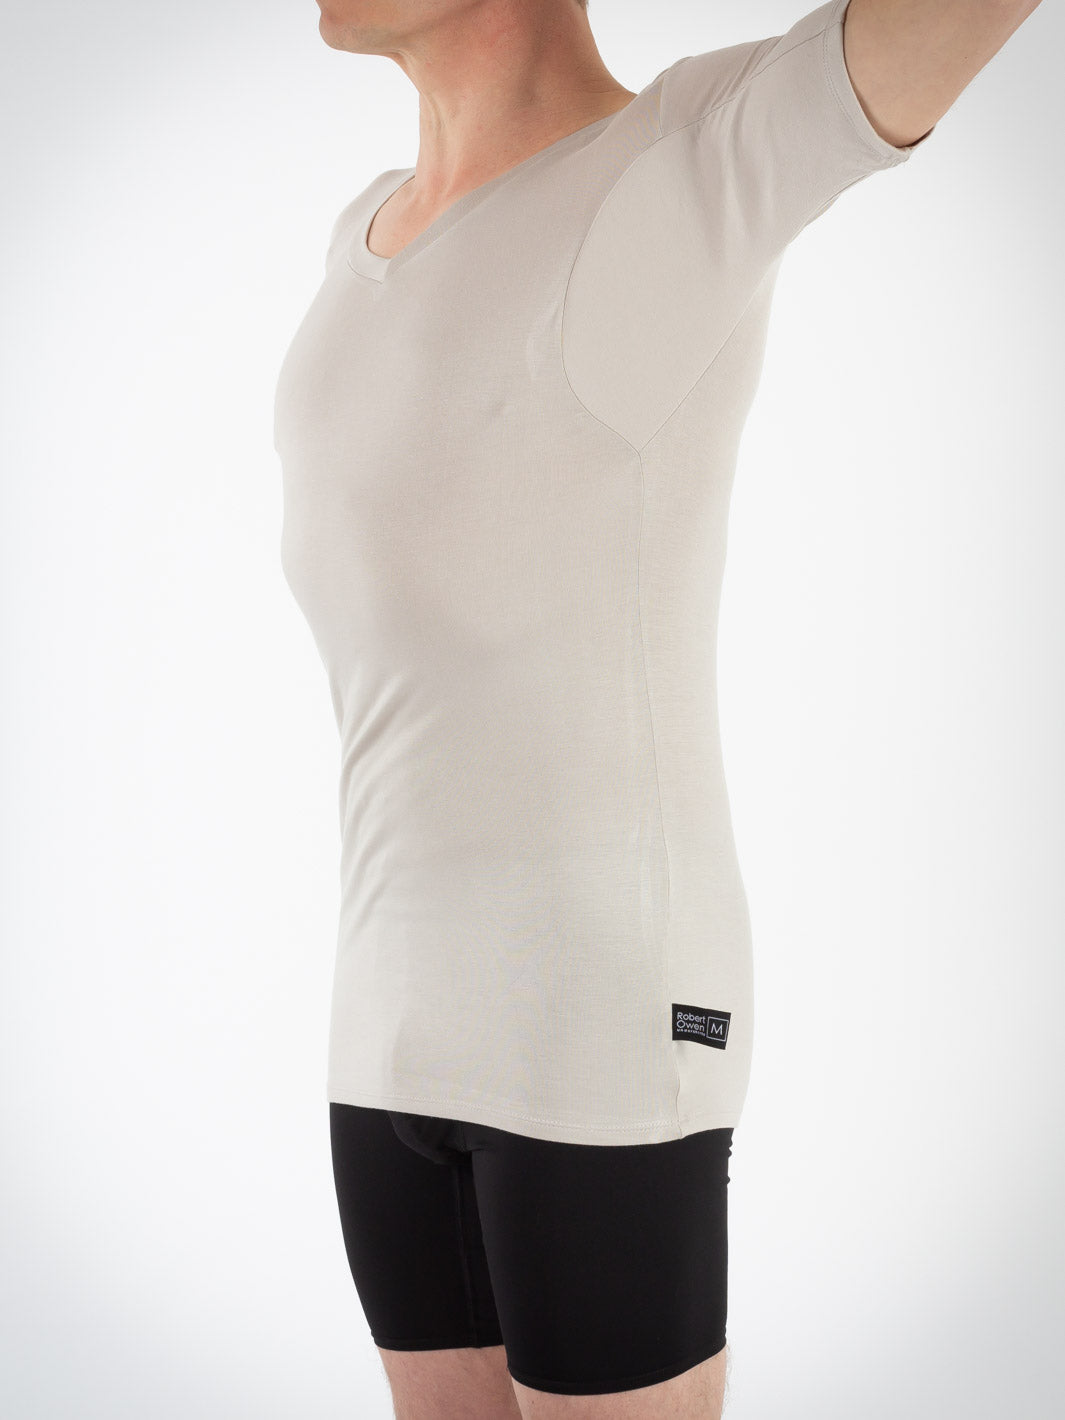 Picture of sweat protect undershirt in grey showing the triple underarm sweat blocking layers